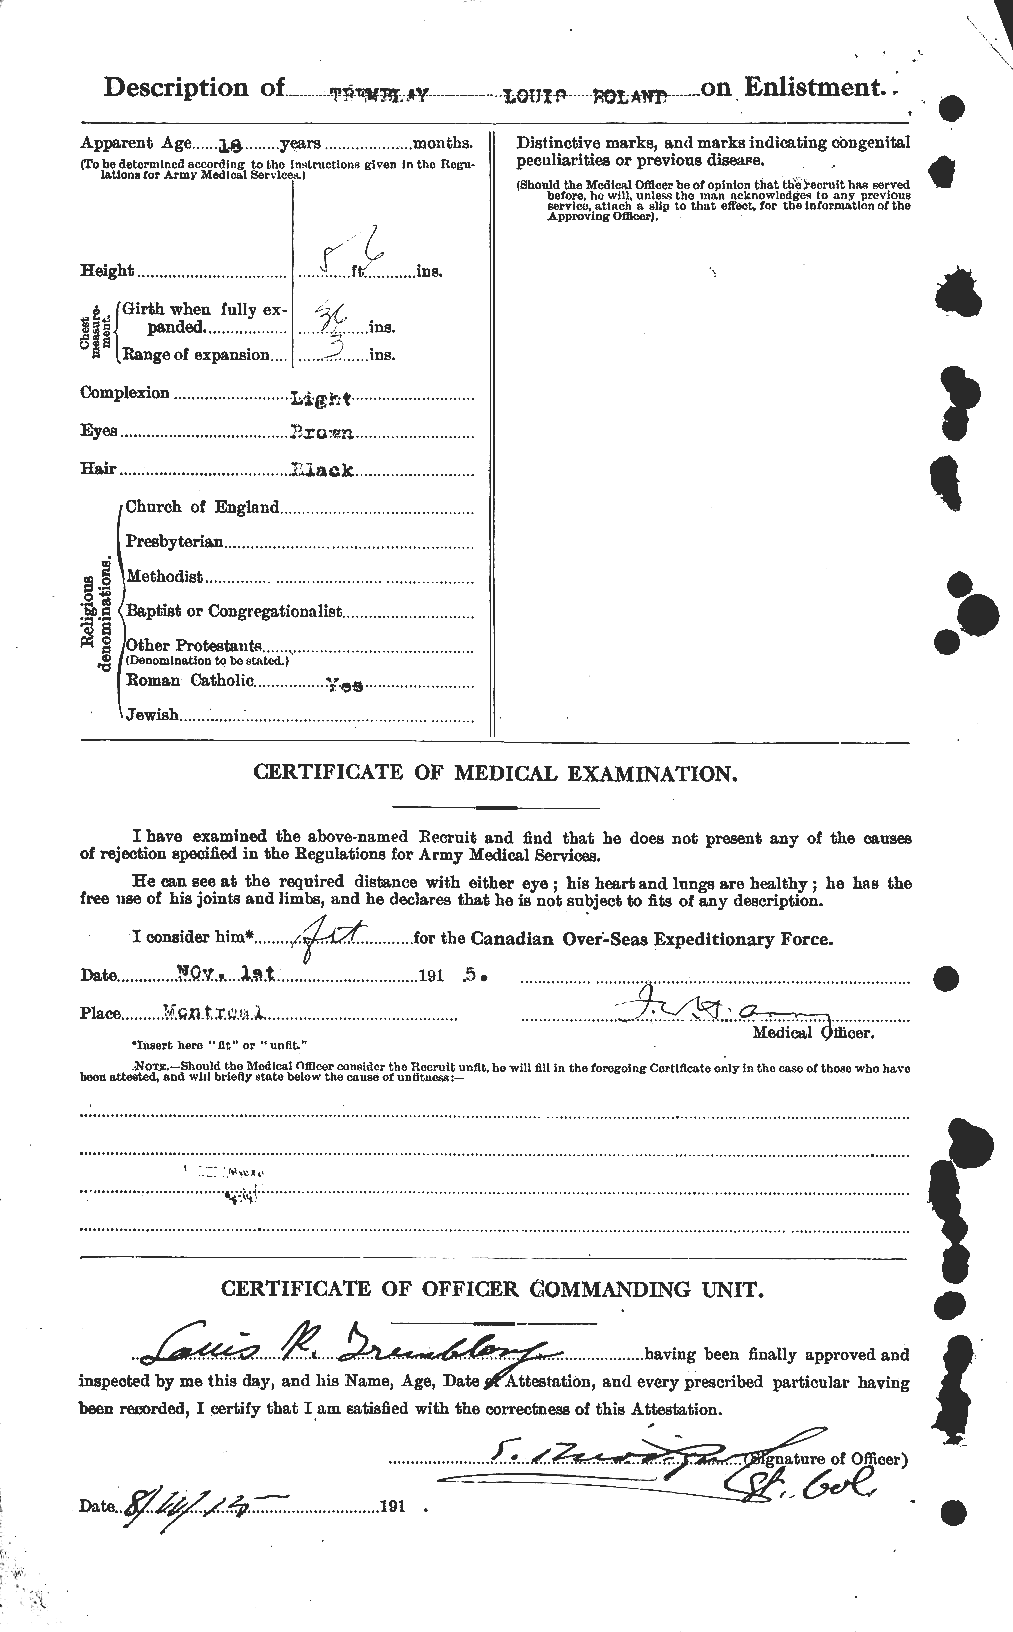 Personnel Records of the First World War - CEF 639194b